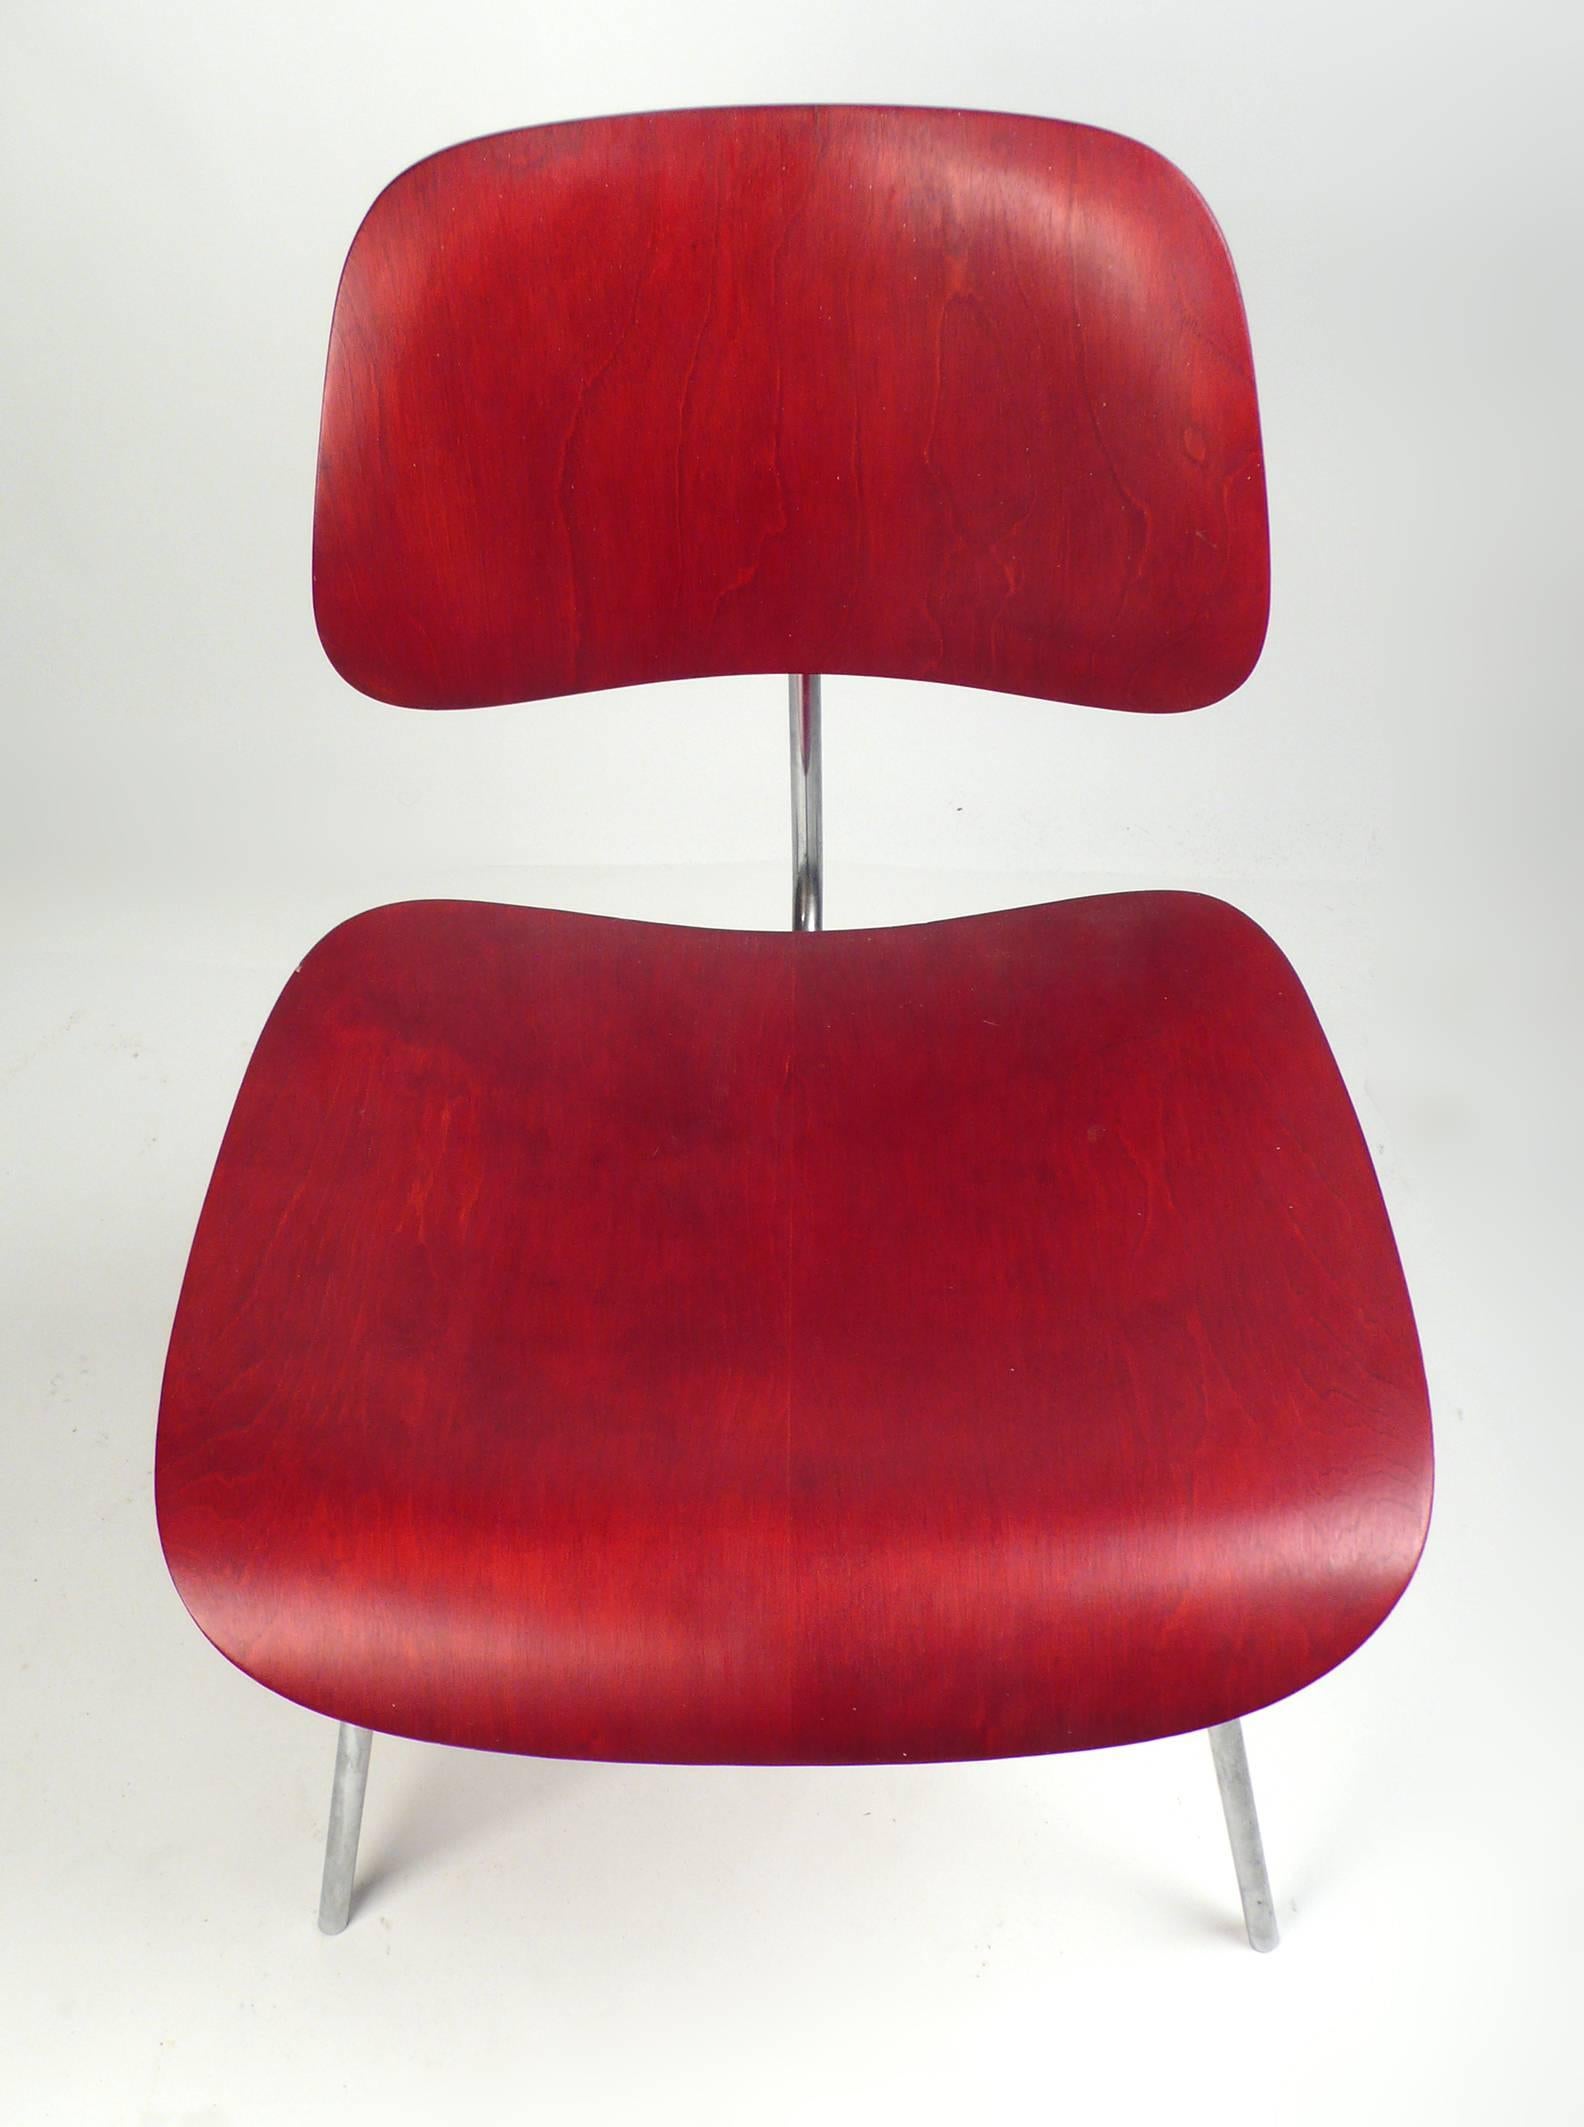 Early Production red analine dye DCM designed by Charles Eames manufactured by Herman Miller. Chair is in very good original condition.